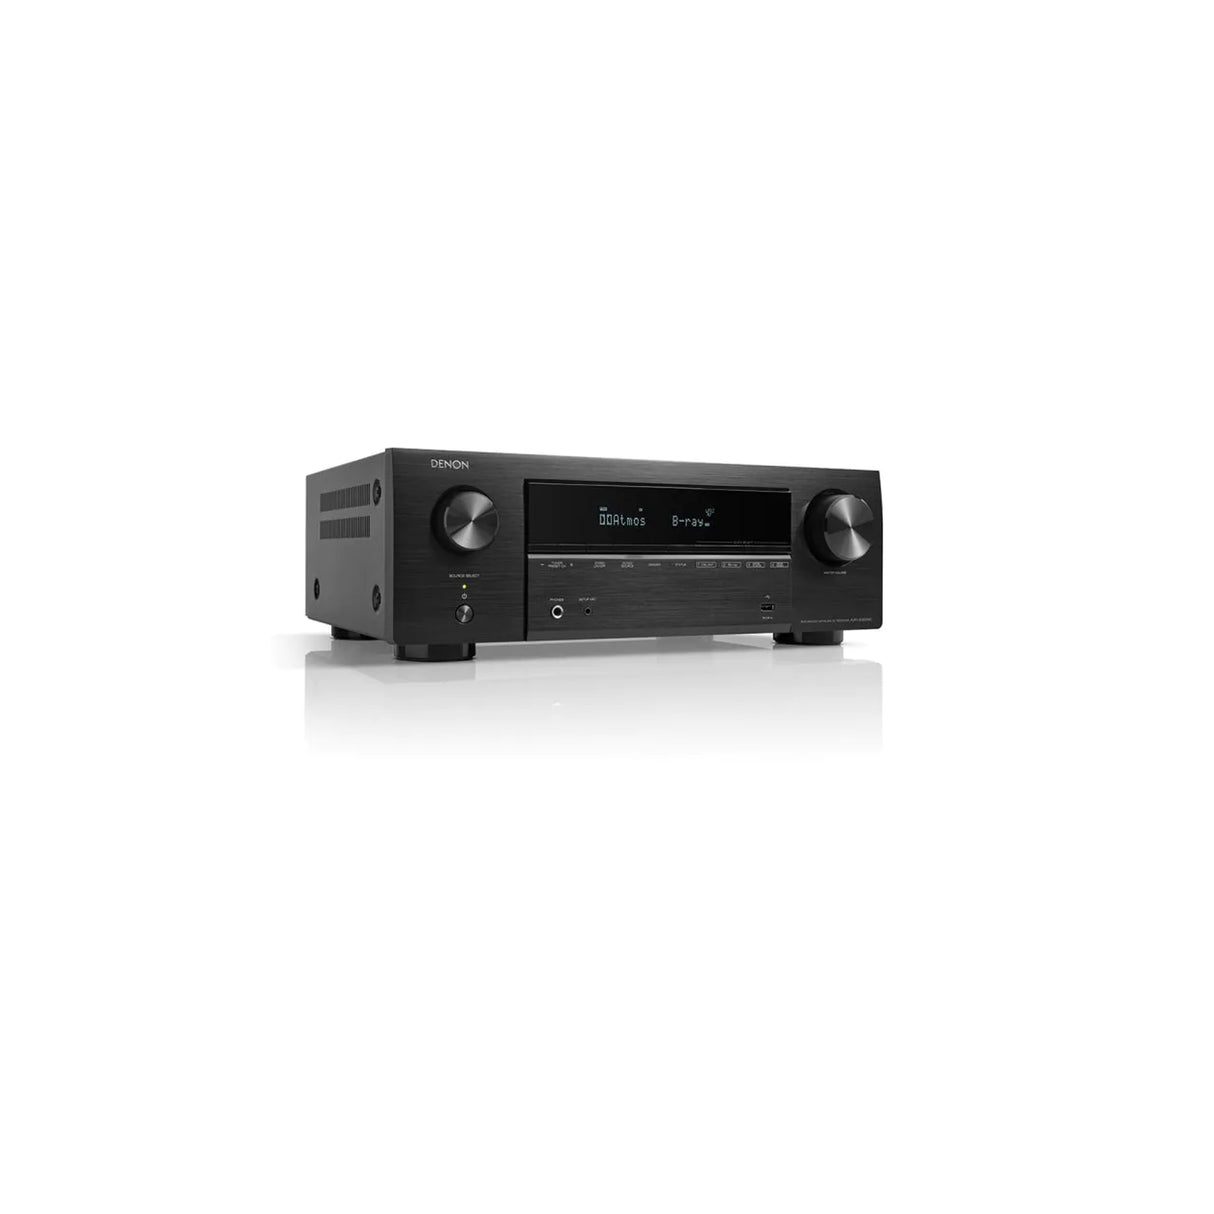 Denon AVR-X1800H - 7.2 Channel AV Receiver with Yamaha NS-P41 5.1 Speaker Package (Bundle Package)